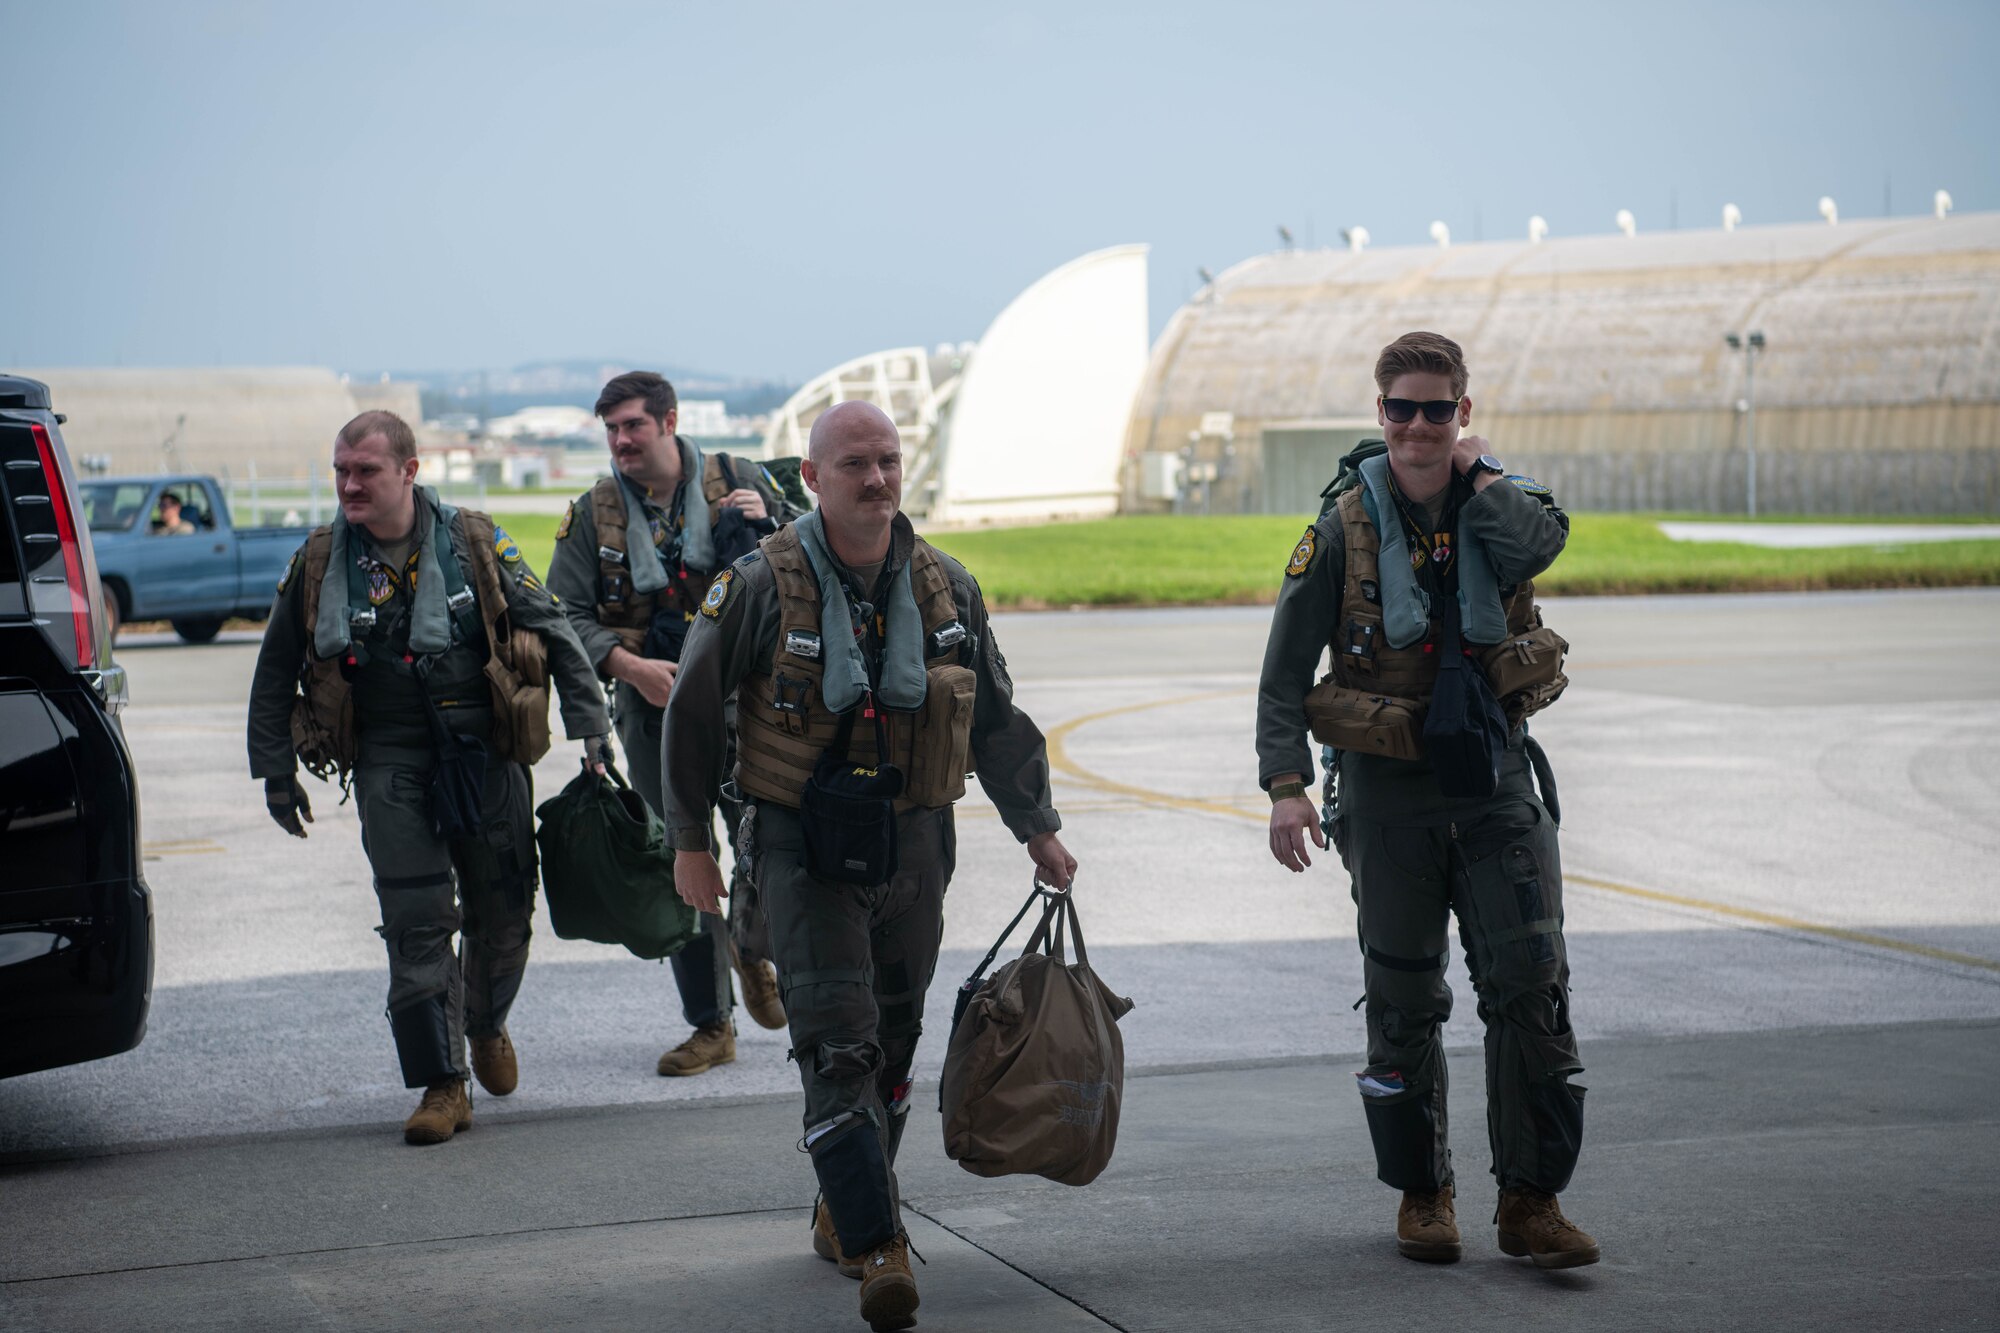 Four pilots carrying bags walk in a direction.